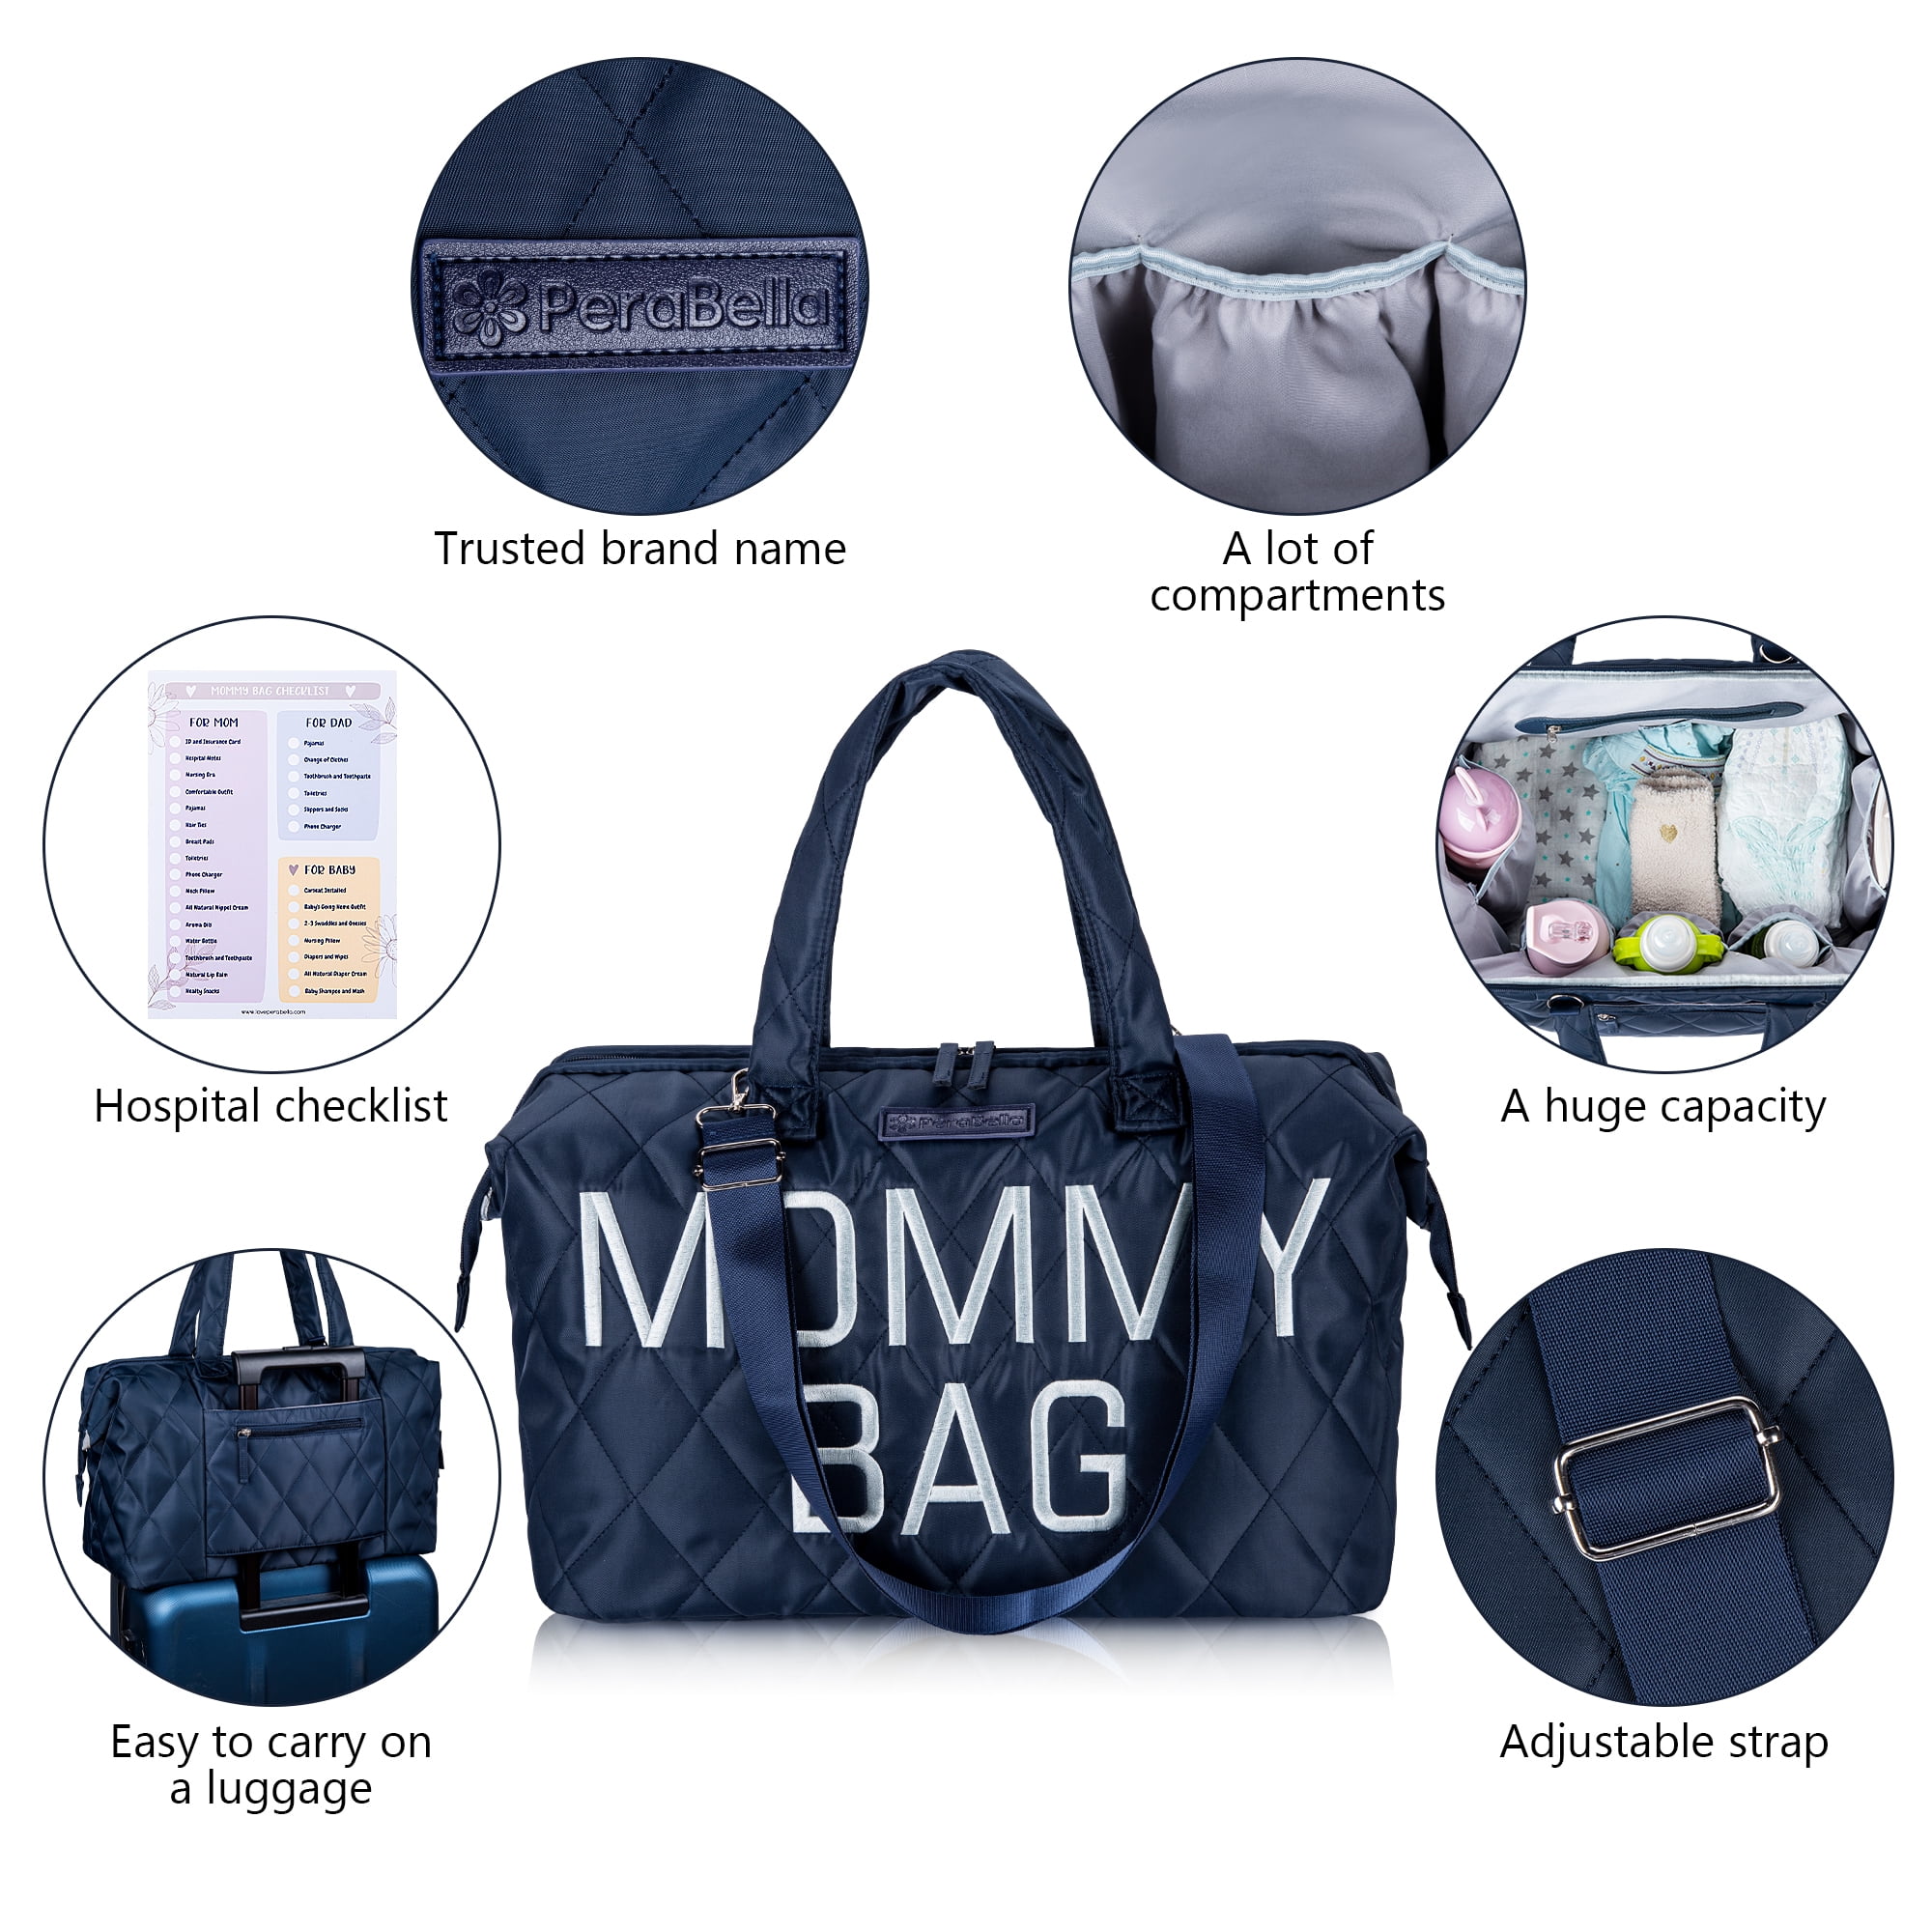 Houseables Mommy Bag, Hospital Bags for Labor and Delivery, Baby Diaper  Tote, 3 Piece, 15.7 x 8 x 10.6, Navy Blue, Nylon, Mom Essentials Duffle